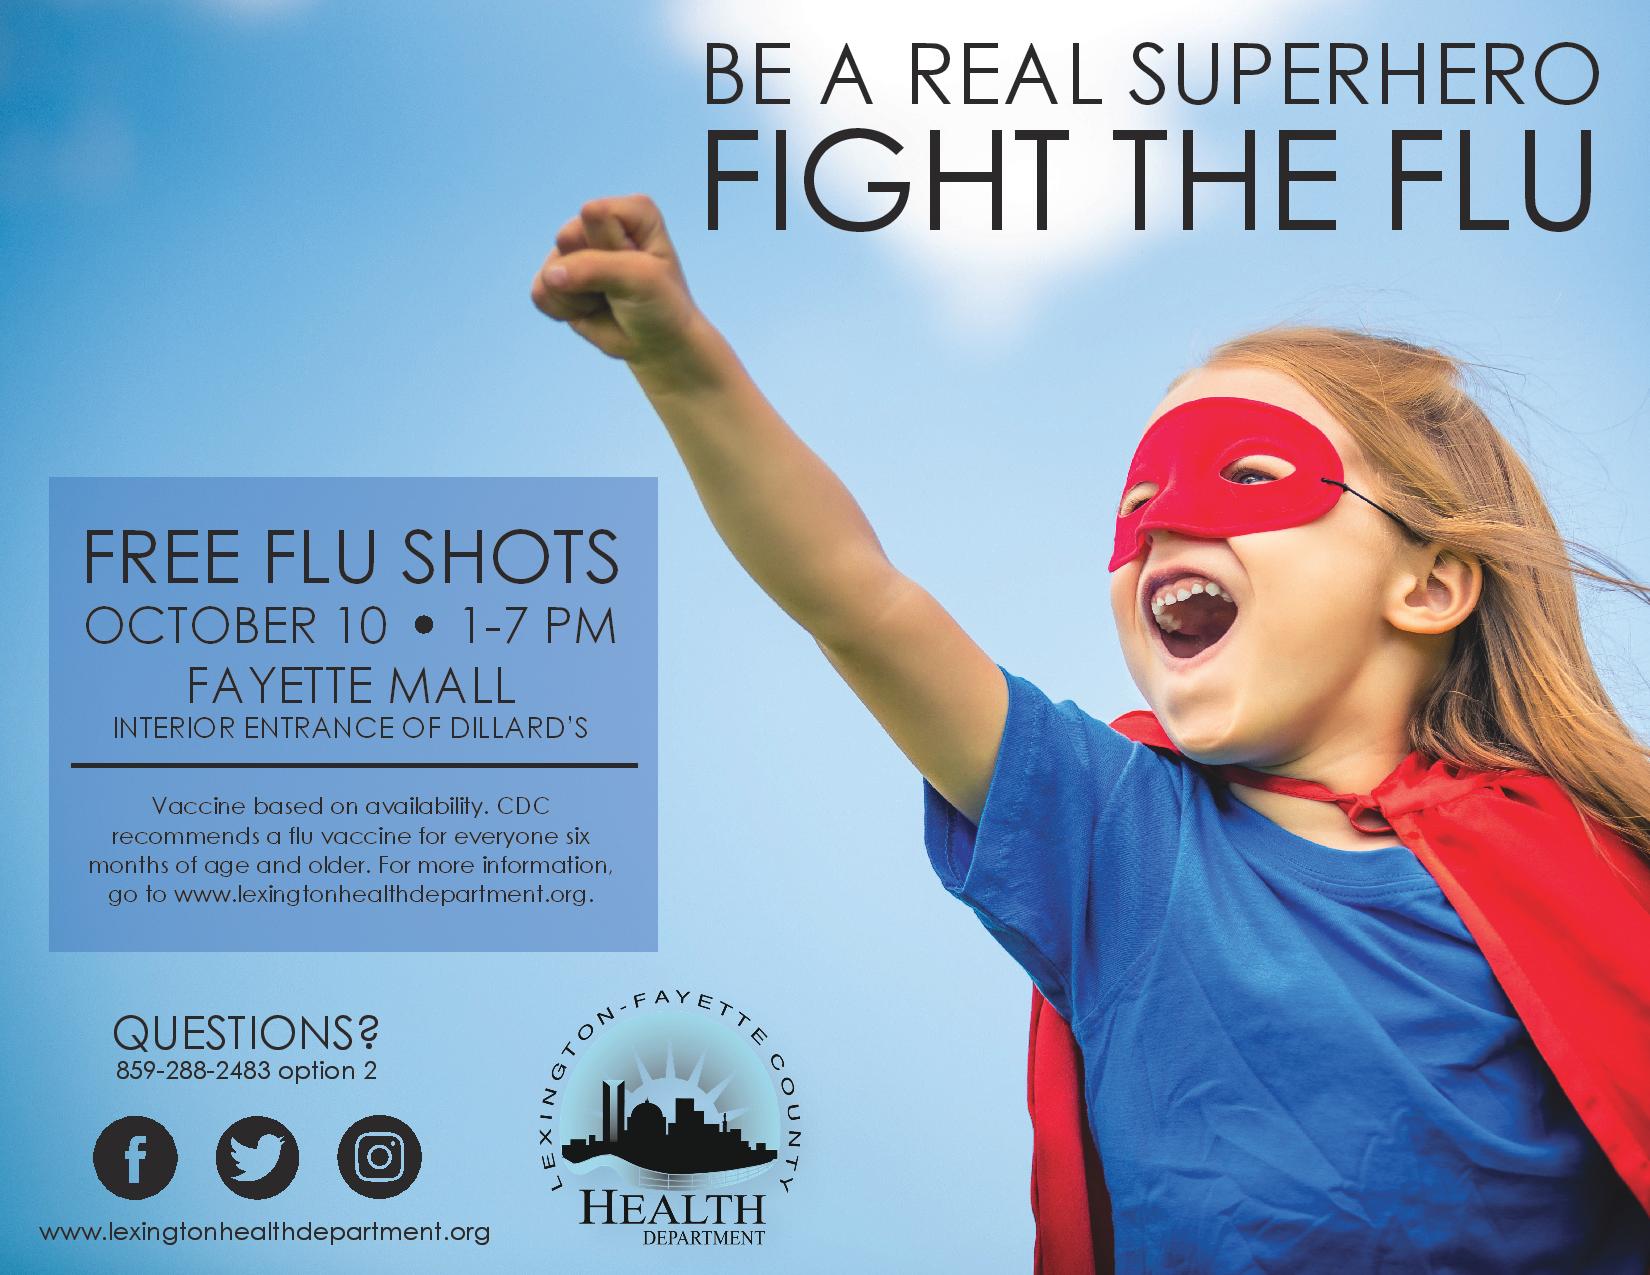 Free Flu Shots at the Mall, Y’all: annual event returns 10/10